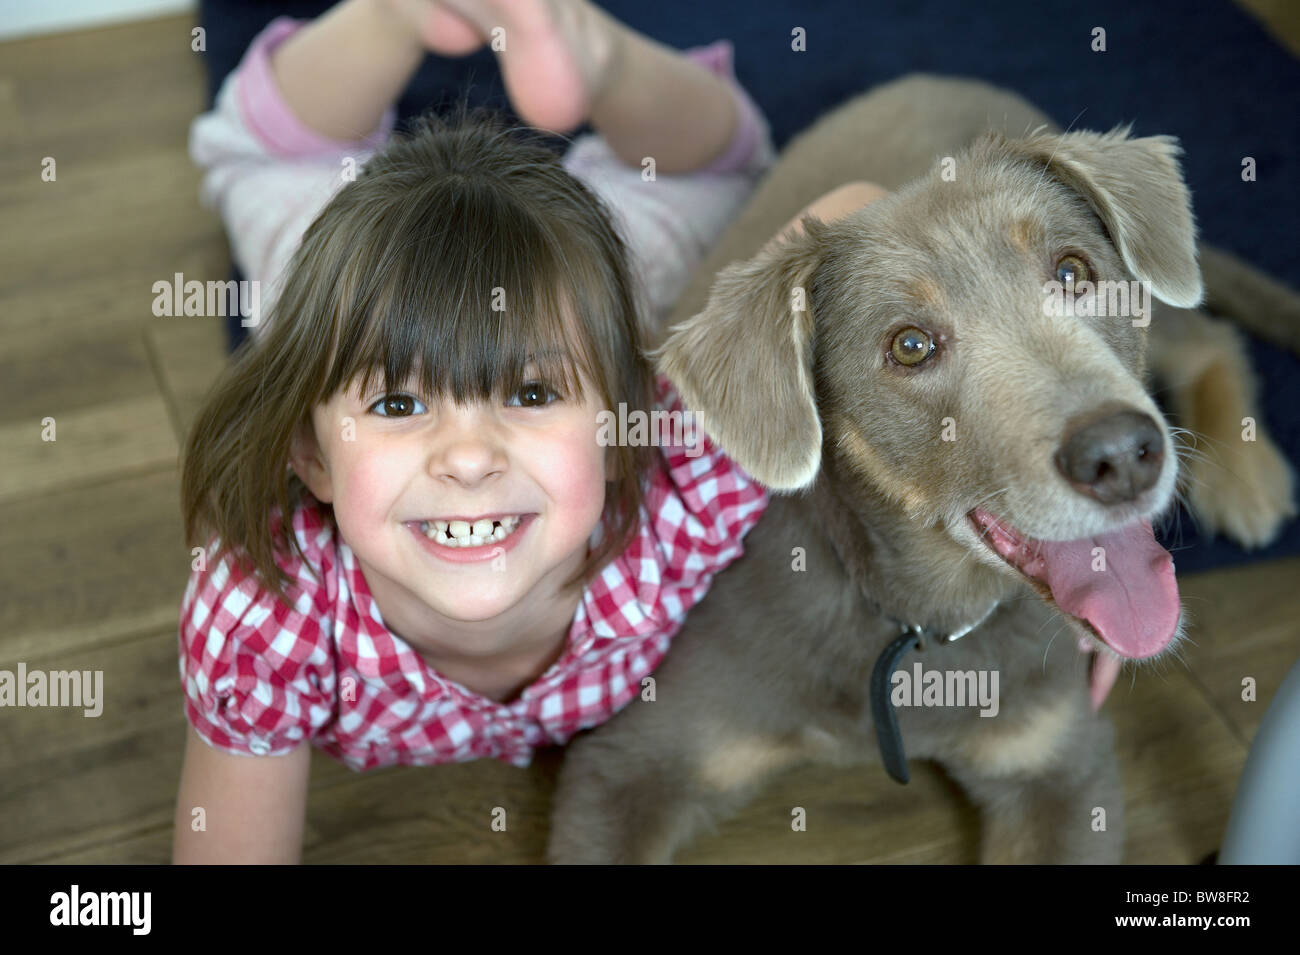 A smiling happy young girl aged six with her arms around her pet dog. Stock Photo